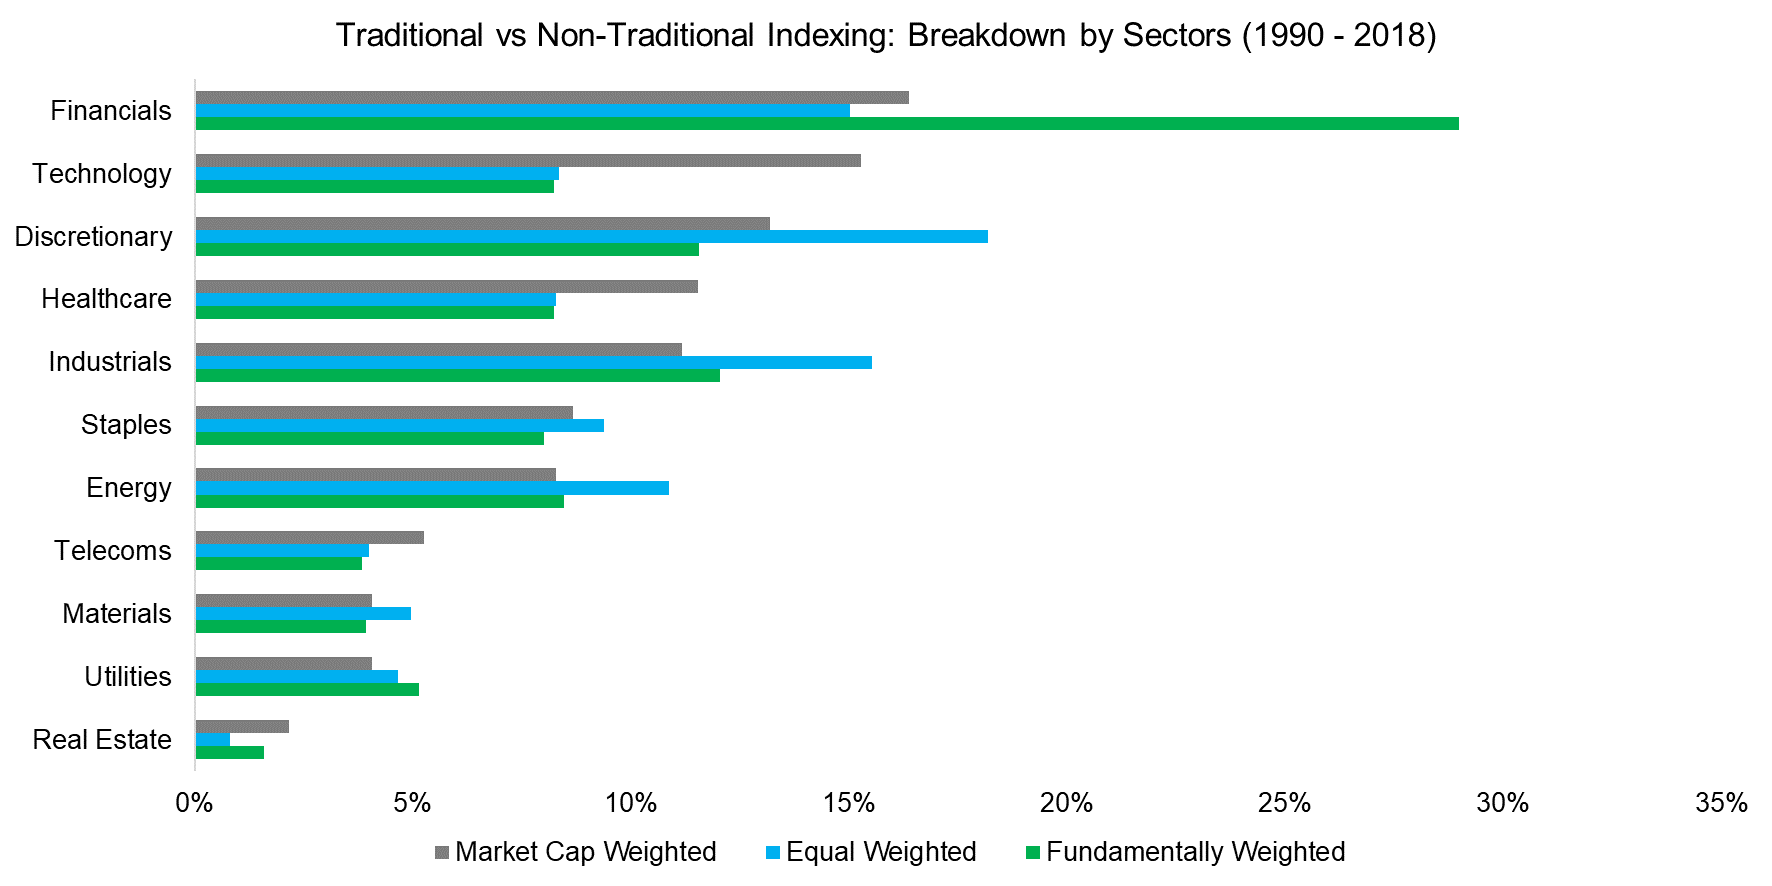 Traditional vs Non-Traditional Indexing Breakdown by Sectors (1990 - 2018)